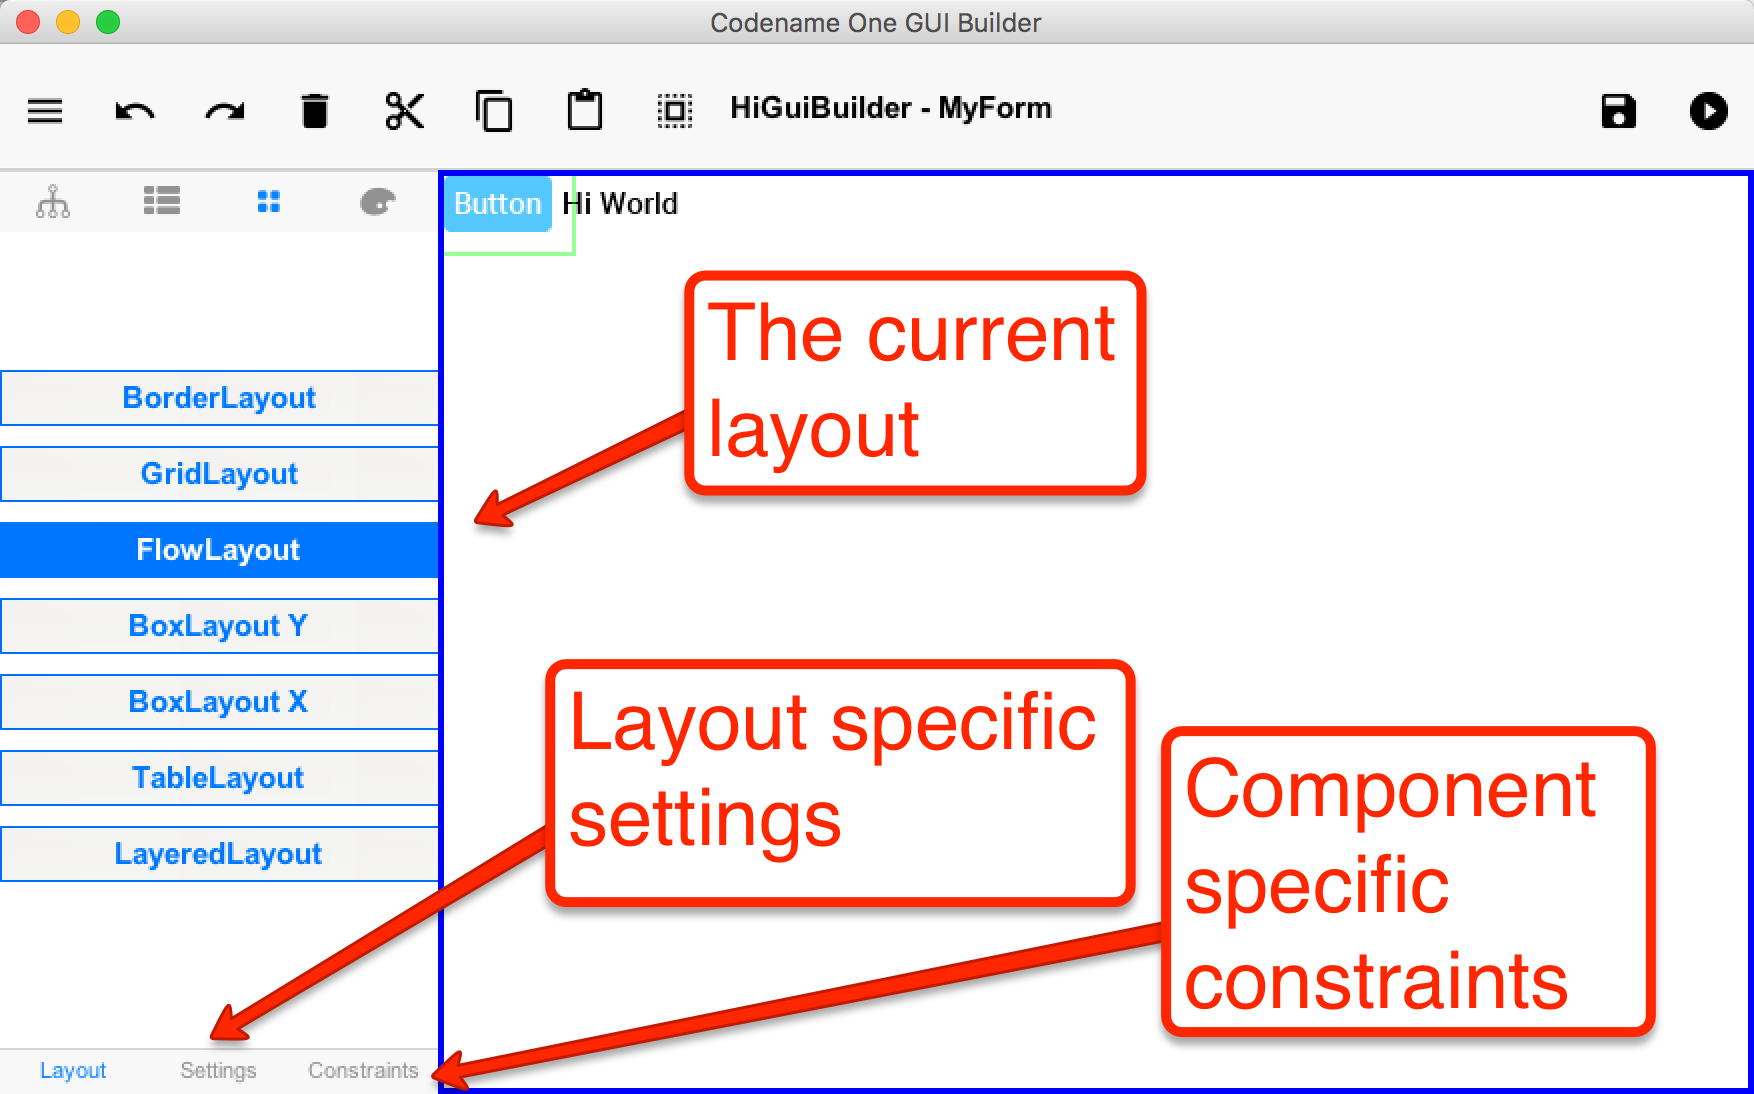 Layouts can be picked via the GUI builder UI